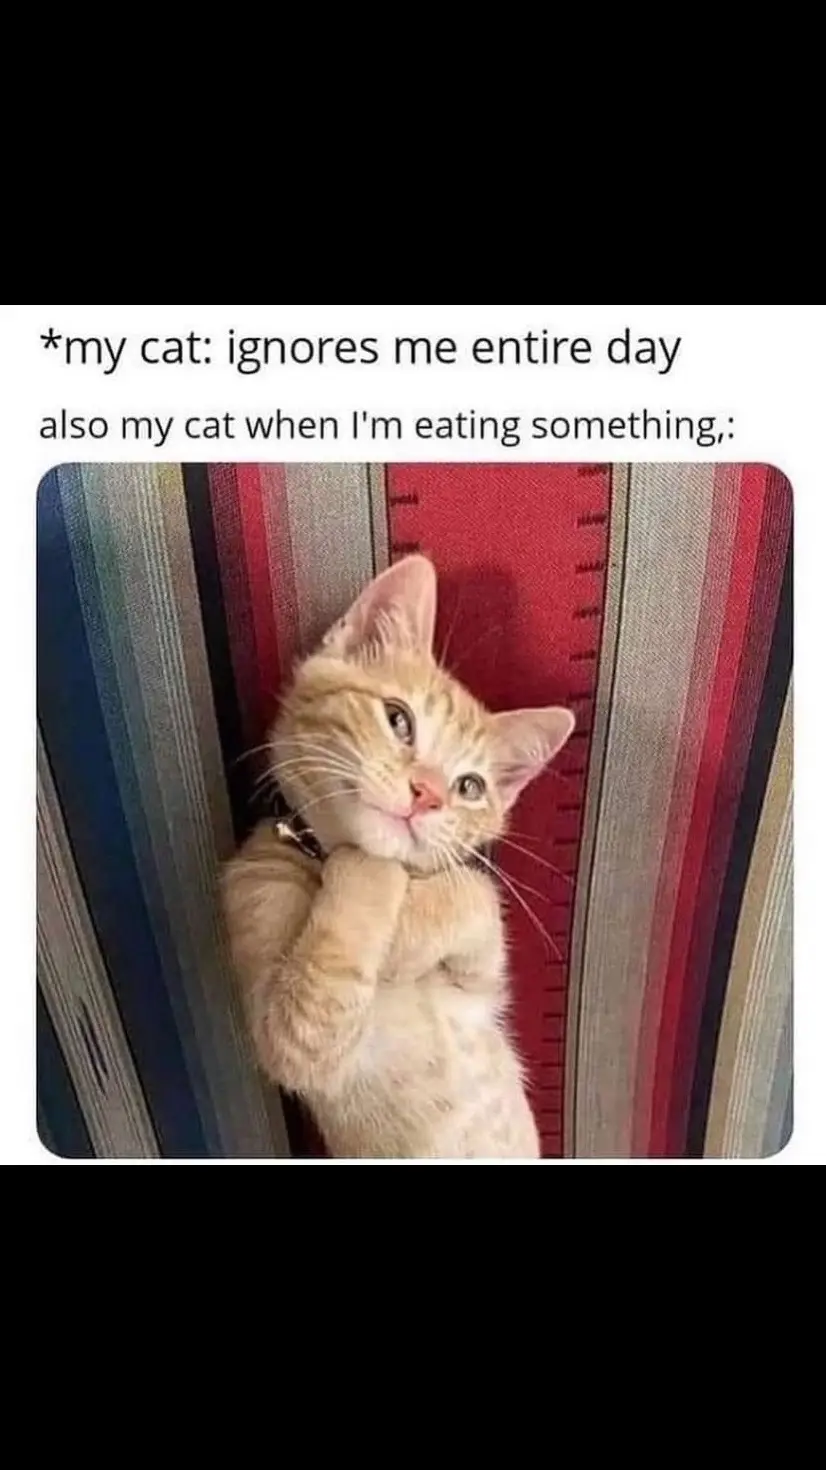 Did ya miss me? 🐱 #cursedcats #cursedcat #animalmemes #sadcats #catlife #catfeatures #catloversclub #catmemes #cat #cattos #catsofinstagram #catmeme #cattomemes #wholesome #catvideo #chonk #cats #memes #furriend #sadcat #wholesomememes #funnycat #funnycatmeme #politecat #funny #cutecat